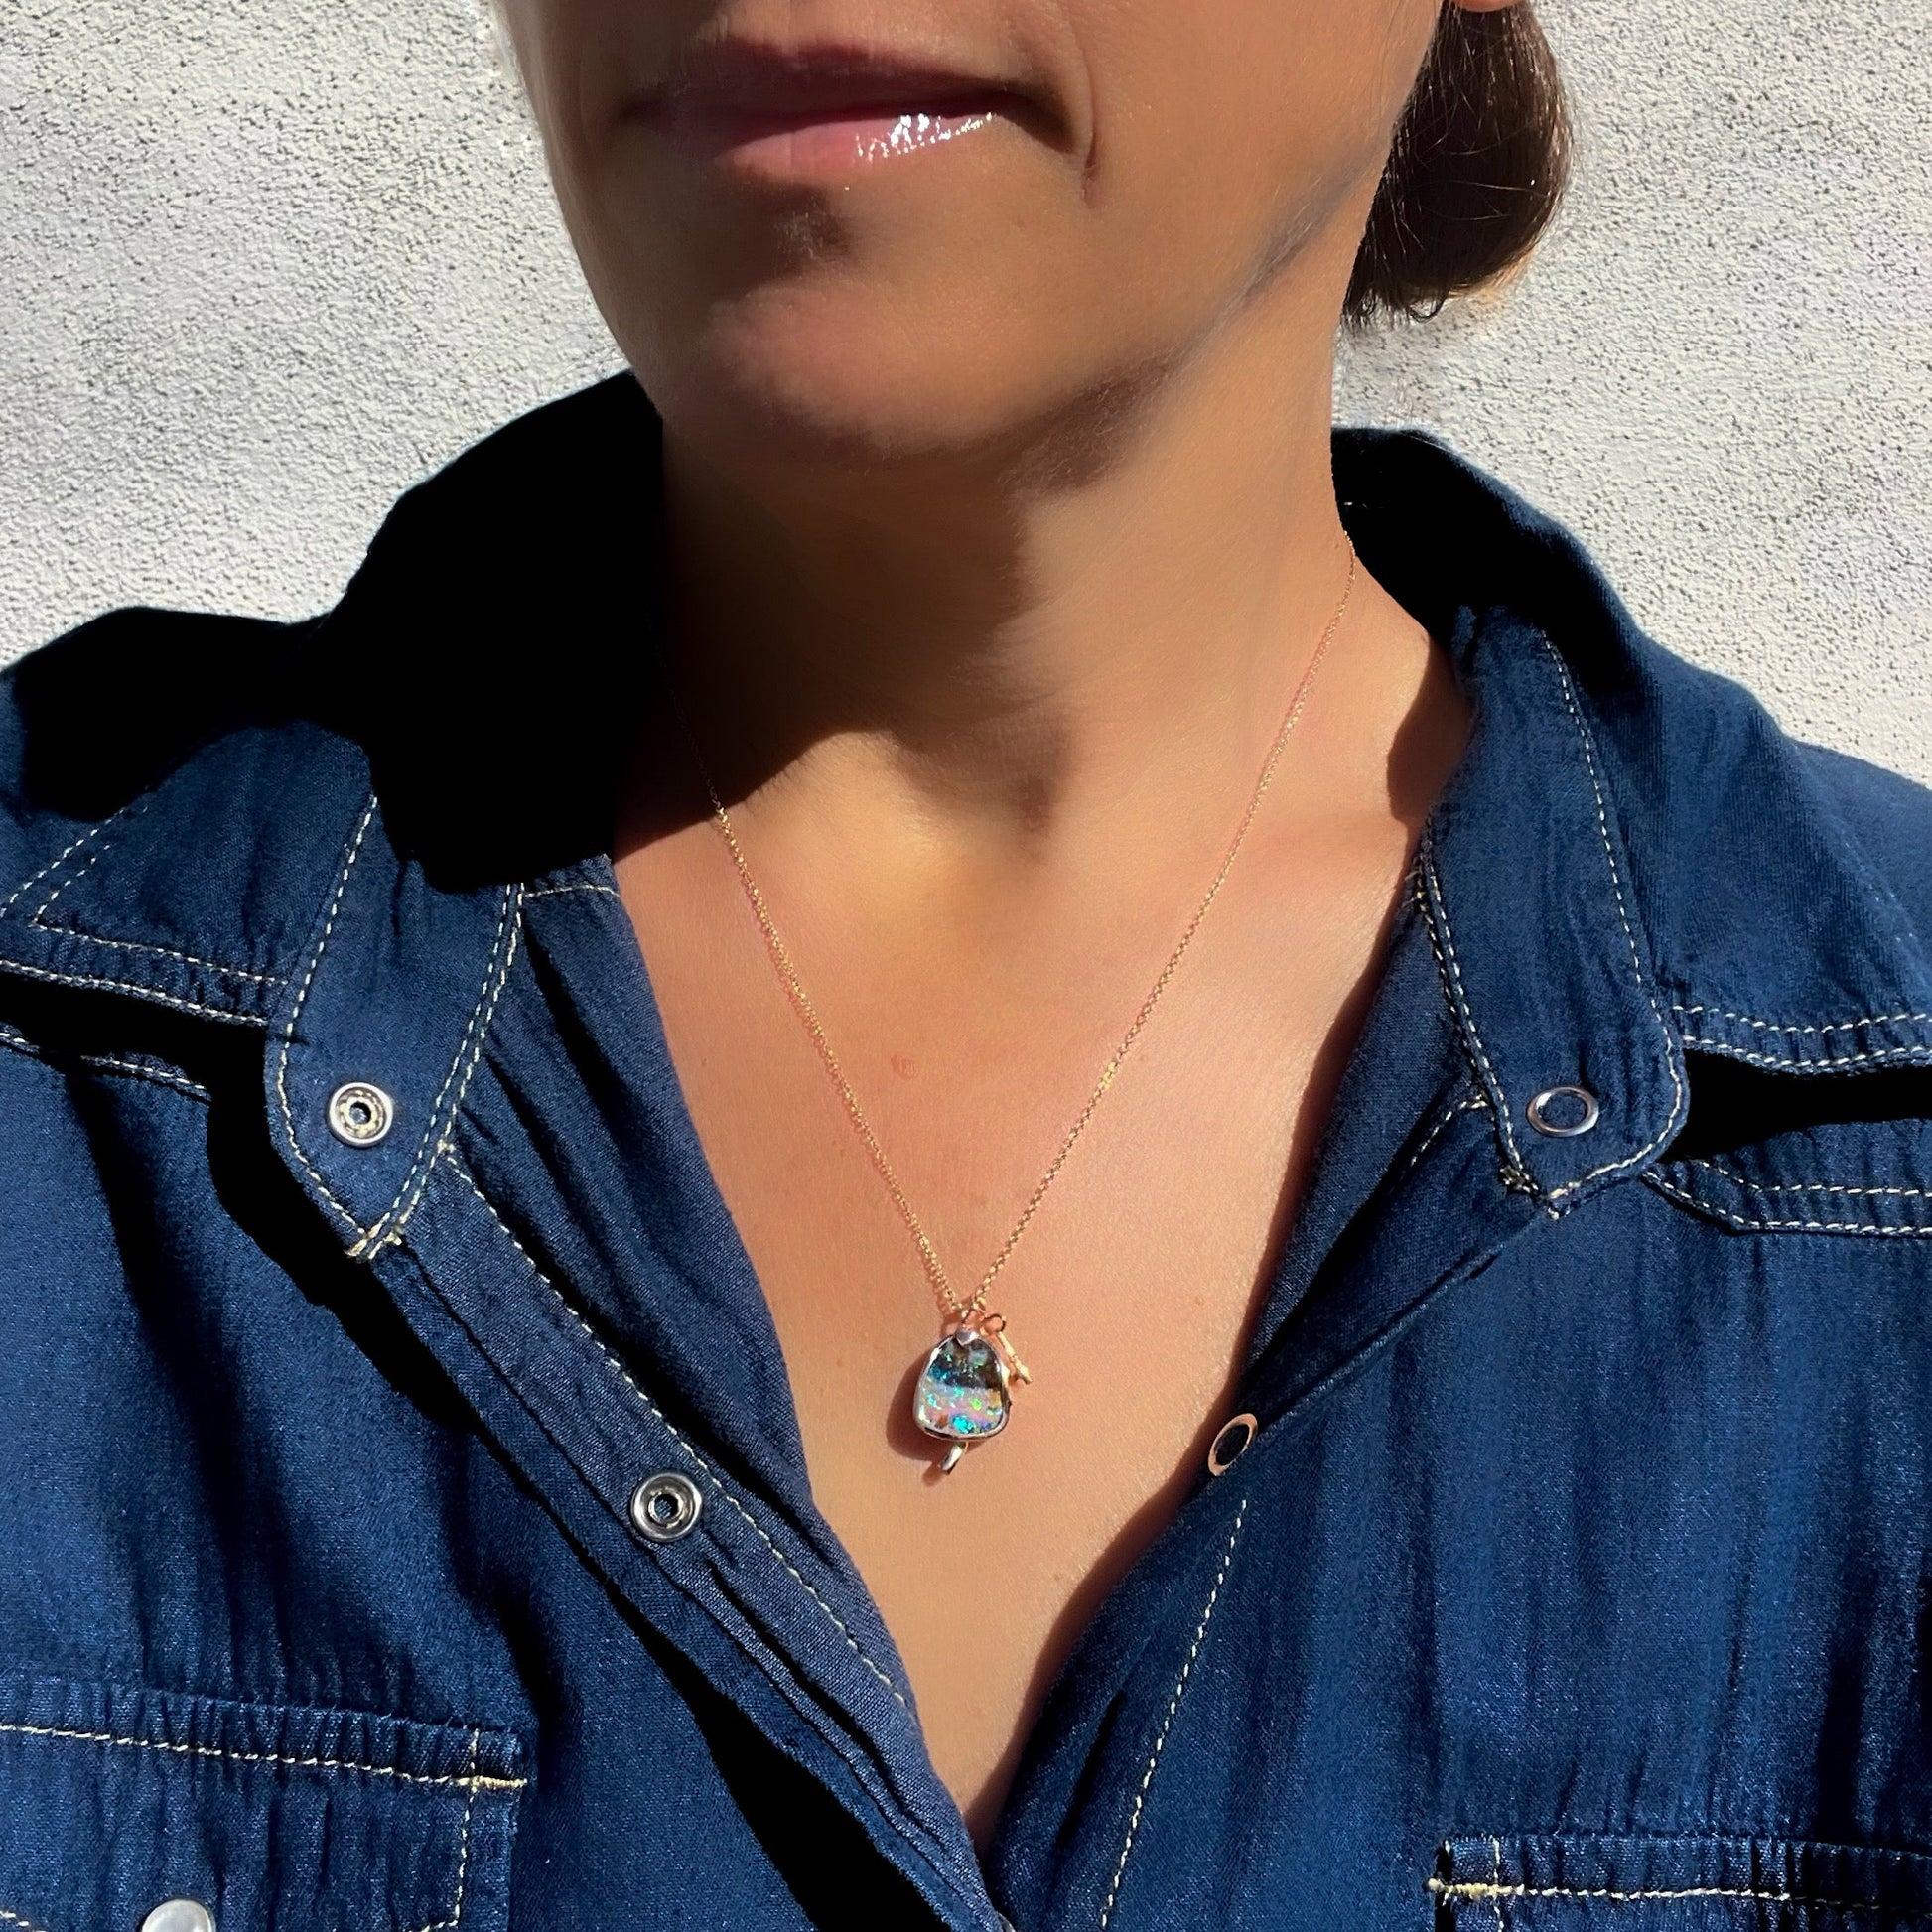 Model wearing an Australian Opal Necklace by NIXIN Jewelry. A mushroom opal necklace with a tiny key charm.